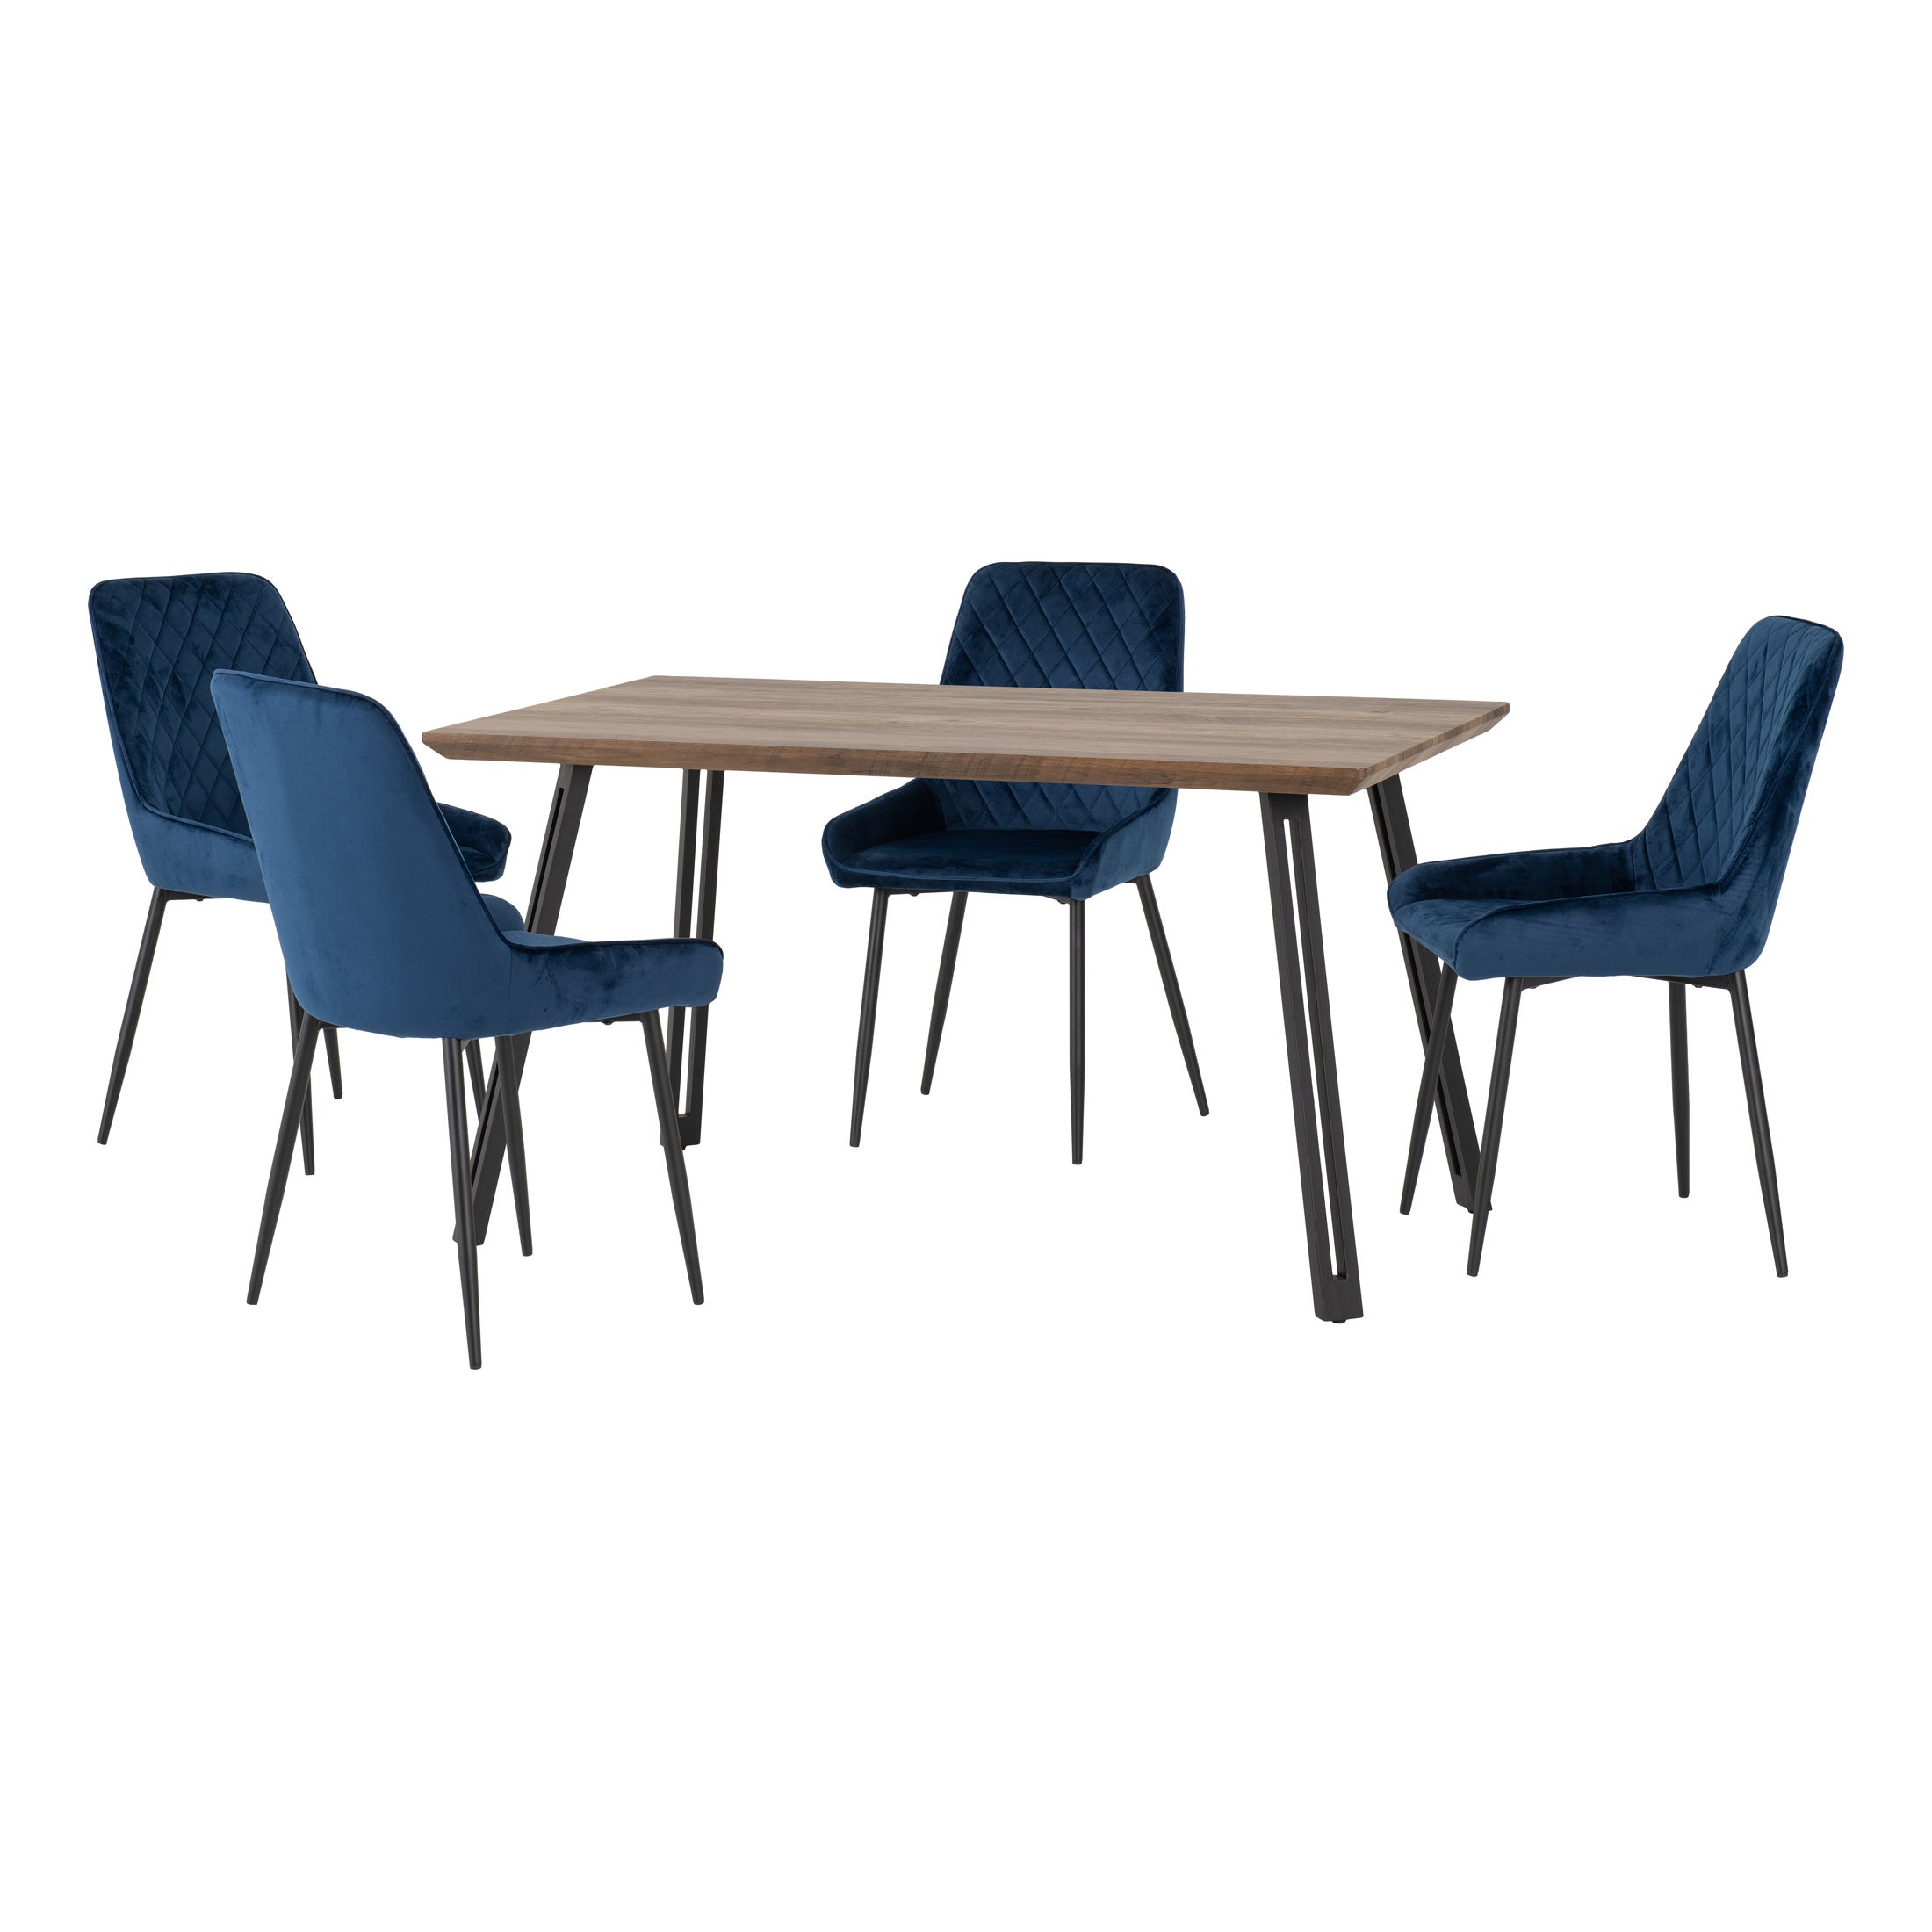 Quebec Rectangular Dining Table with 4 Avery Chairs Navy Blue